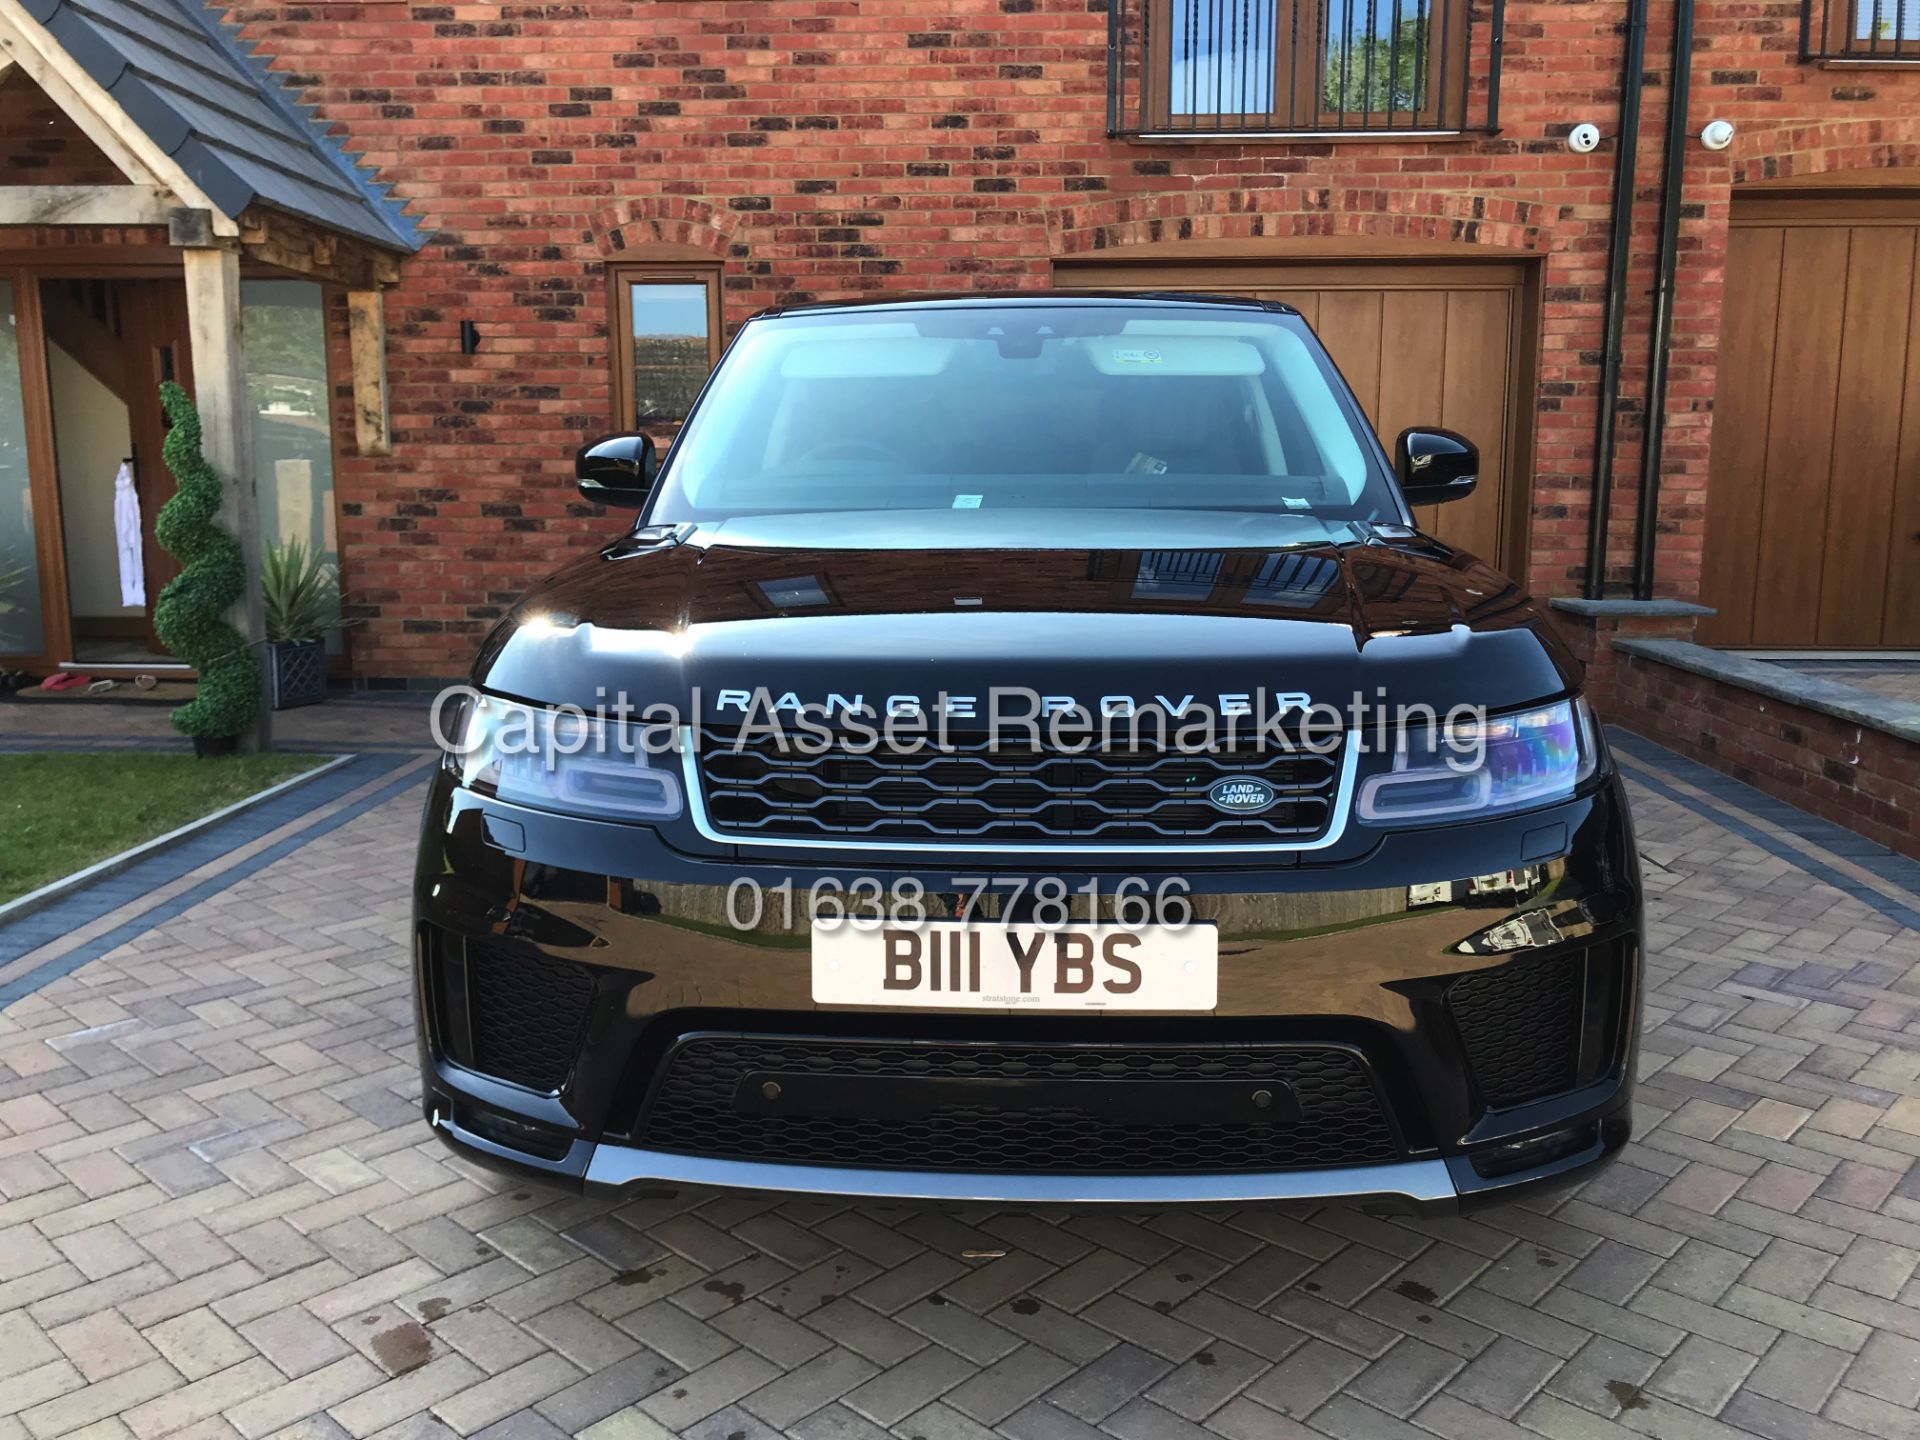 On Sale RANGE ROVER SPORT "HSE" 3.0 SDV6 AUTO (2019) FULLY LOADED - SAT NAV - PAN ROOF- FULL LEATHER - Image 4 of 35